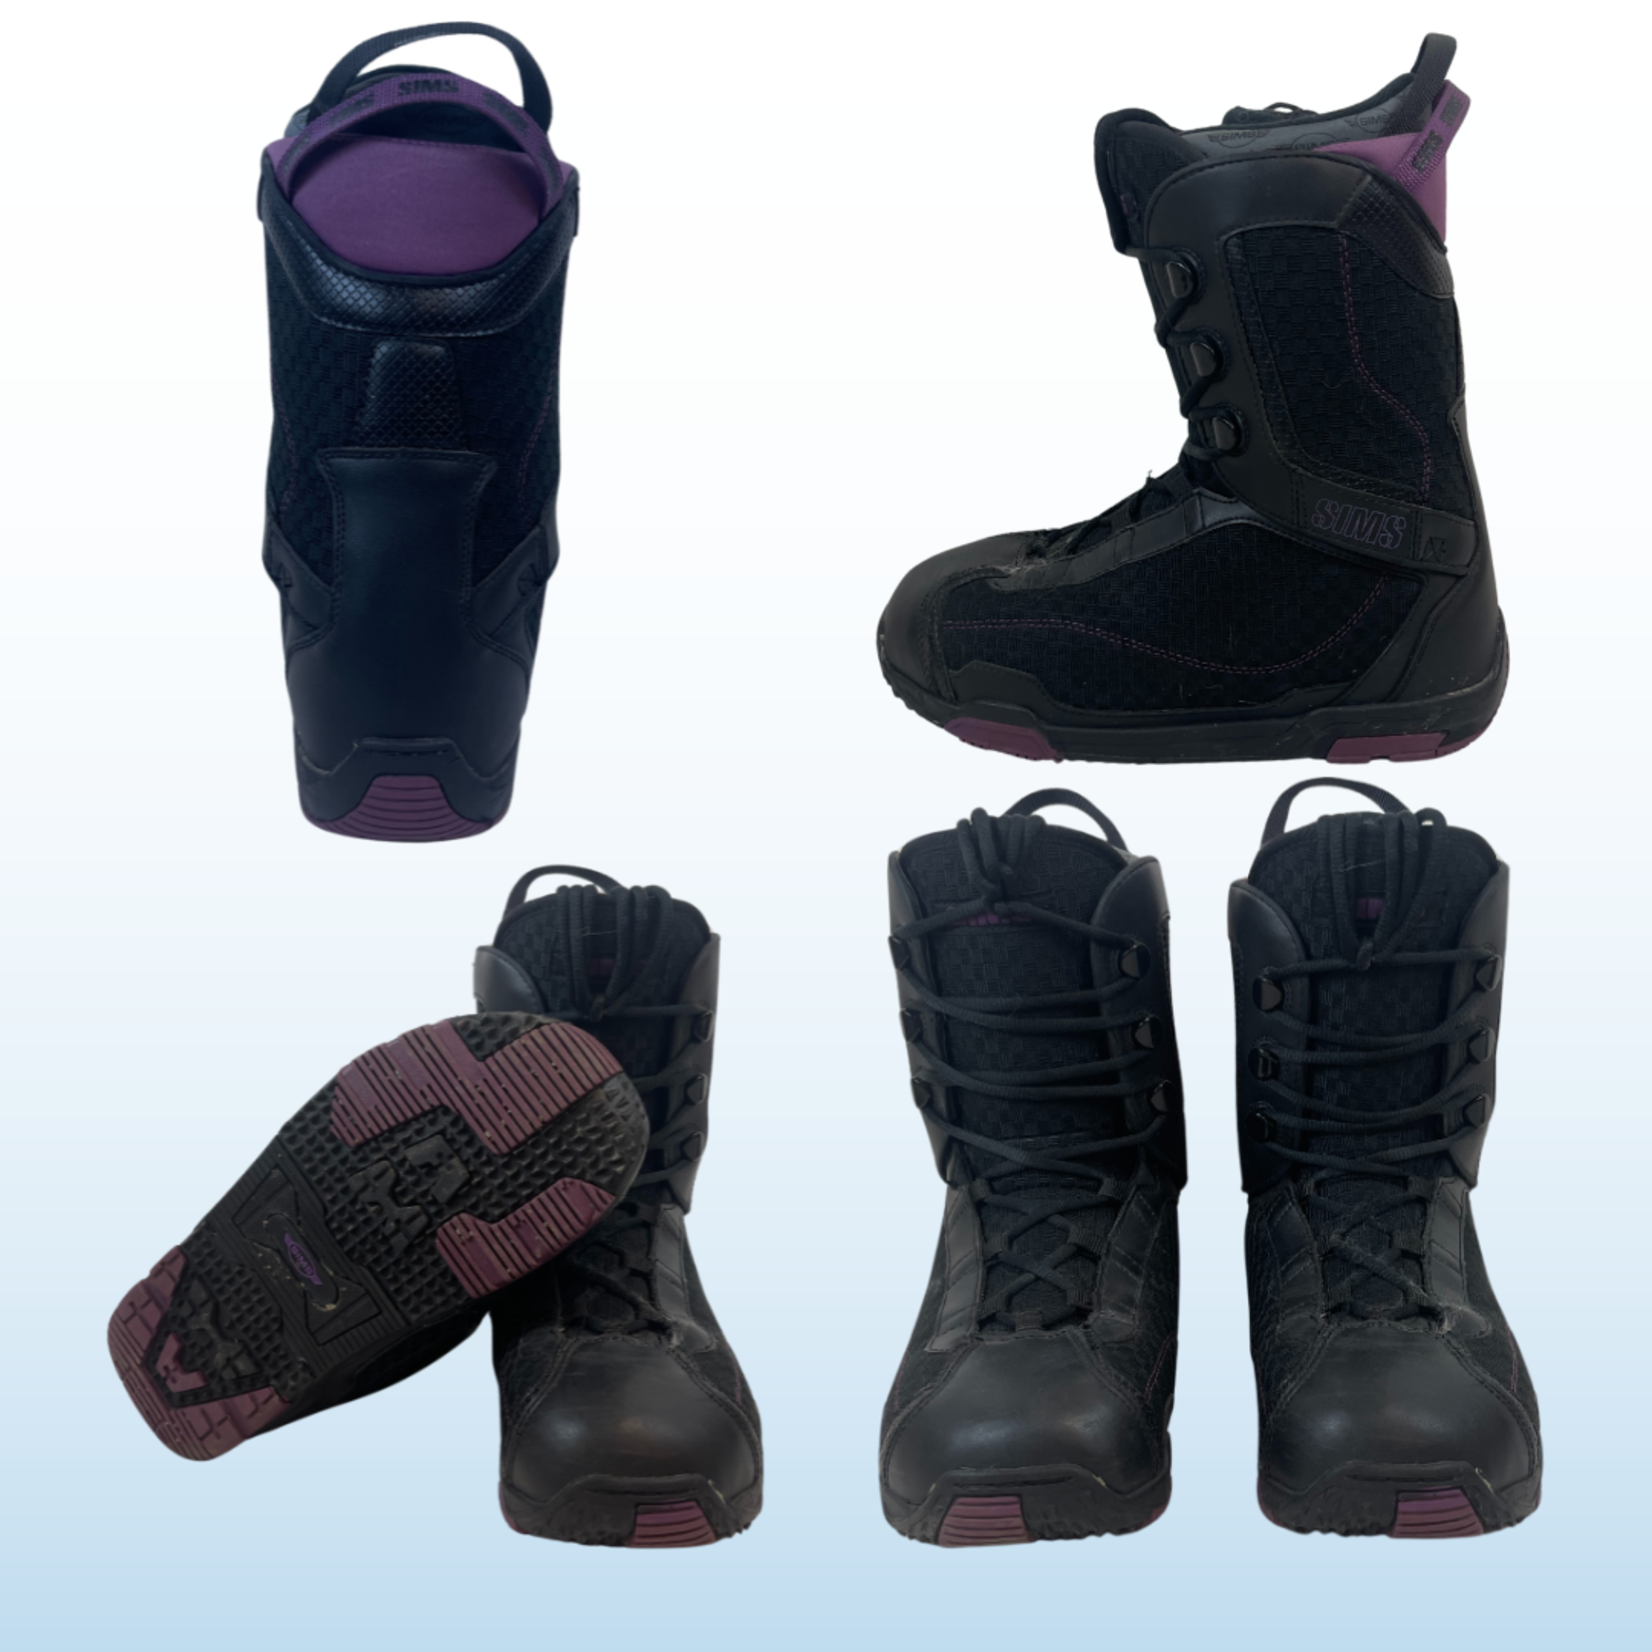 Sims Sims Omen WMNS Snowboard Boots, Size 8